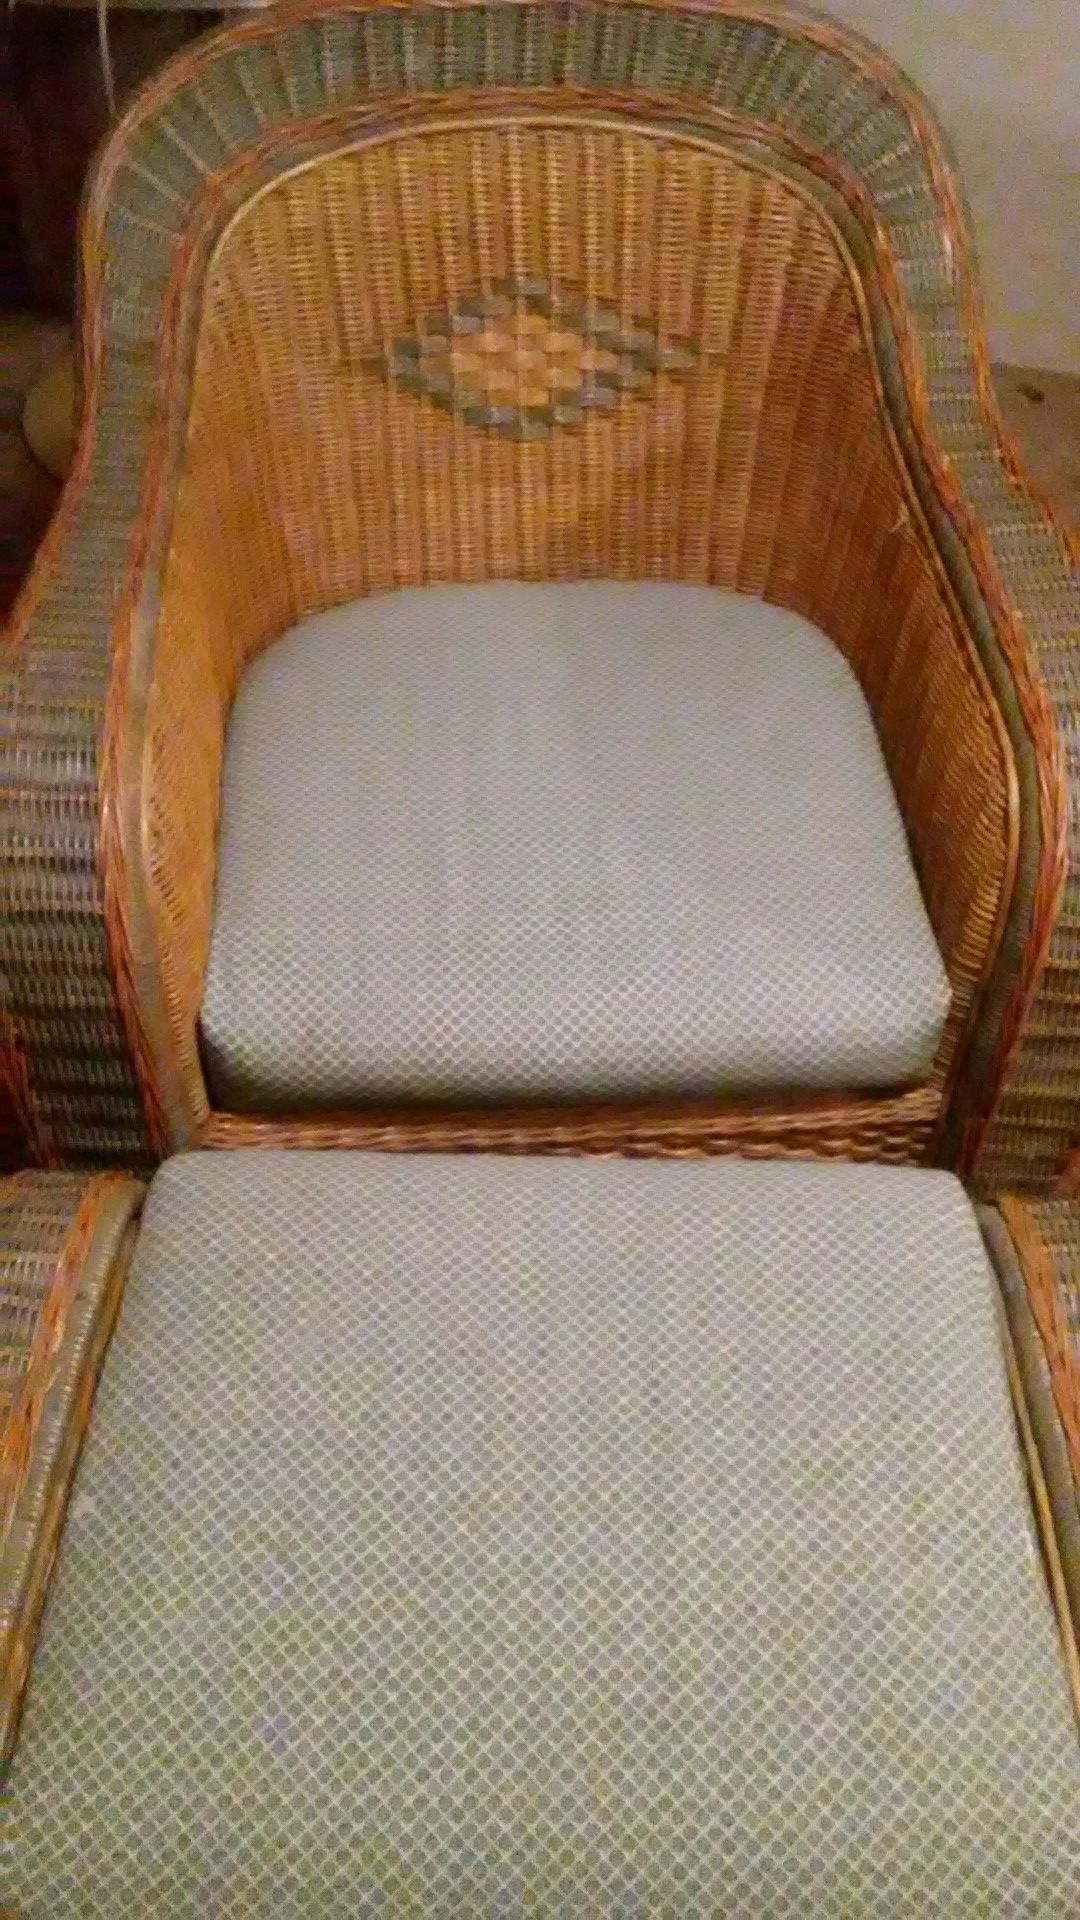 Vintage rattan chair and ottoman with cushions